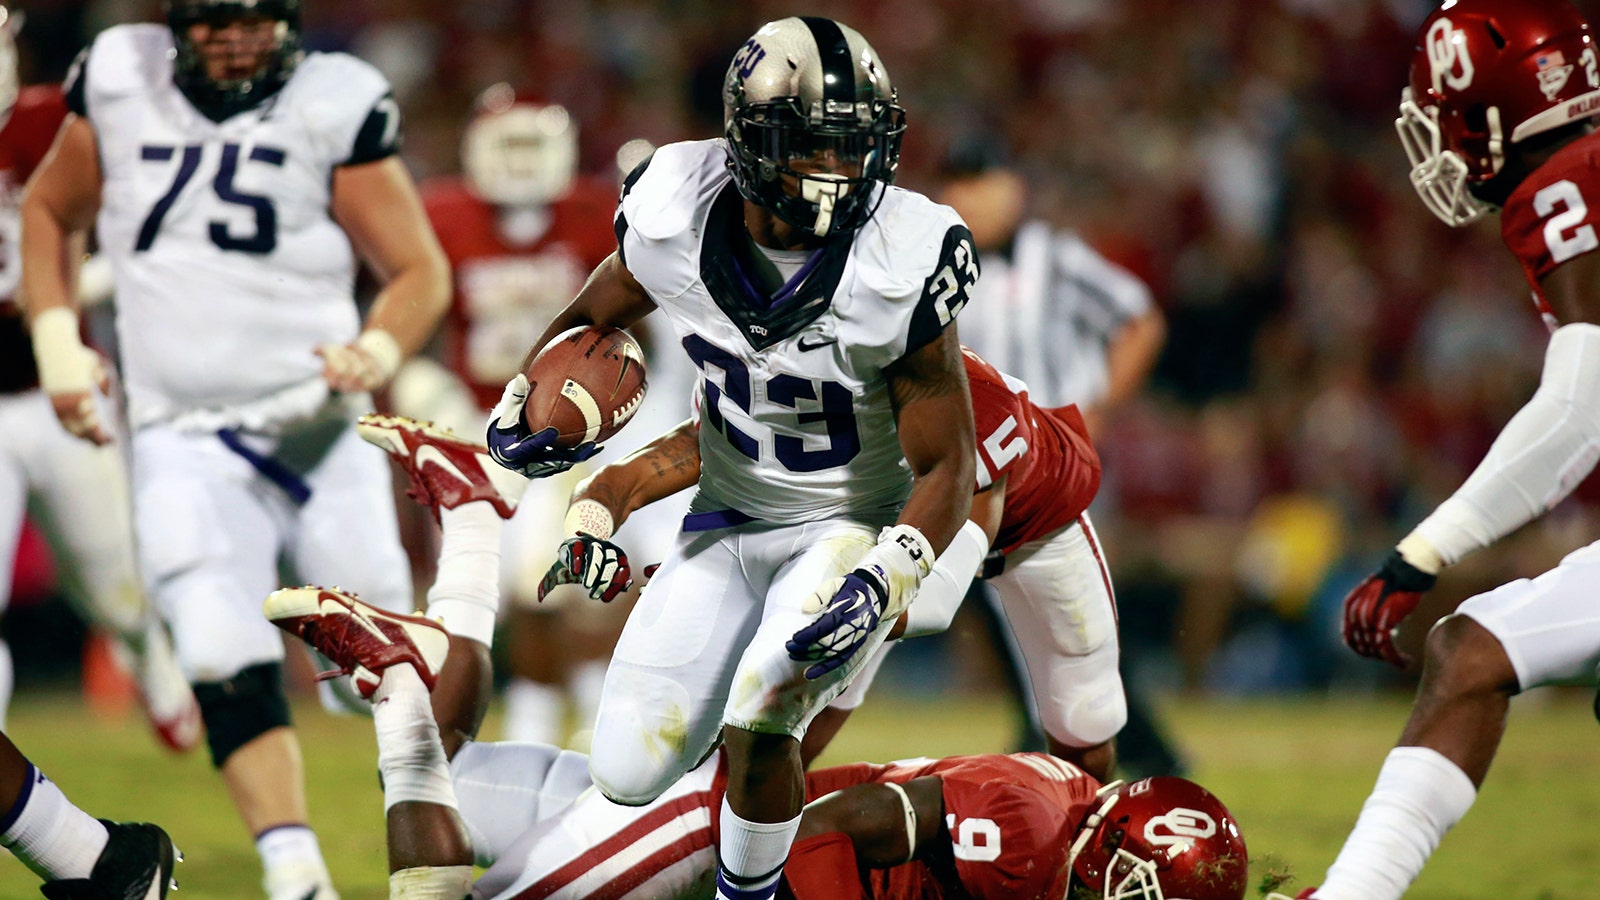 Reports: TCU RB Catalon to declare for NFL draft.